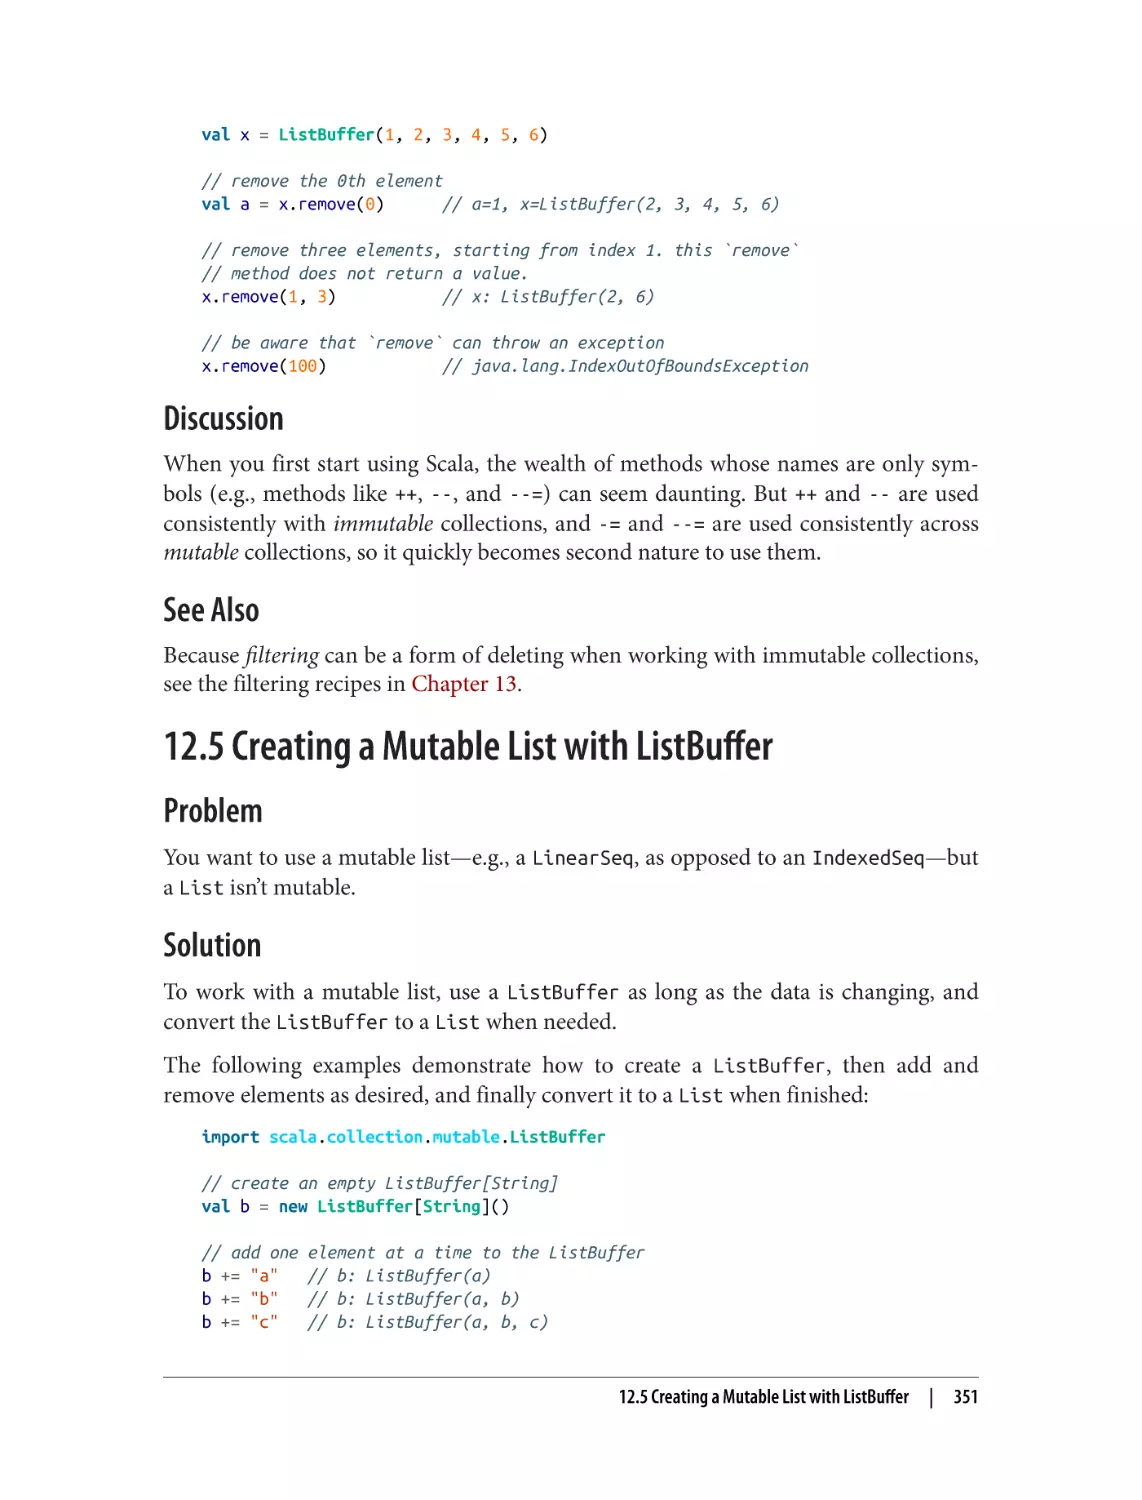 Discussion
See Also
12.5 Creating a Mutable List with ListBuffer
Problem
Solution